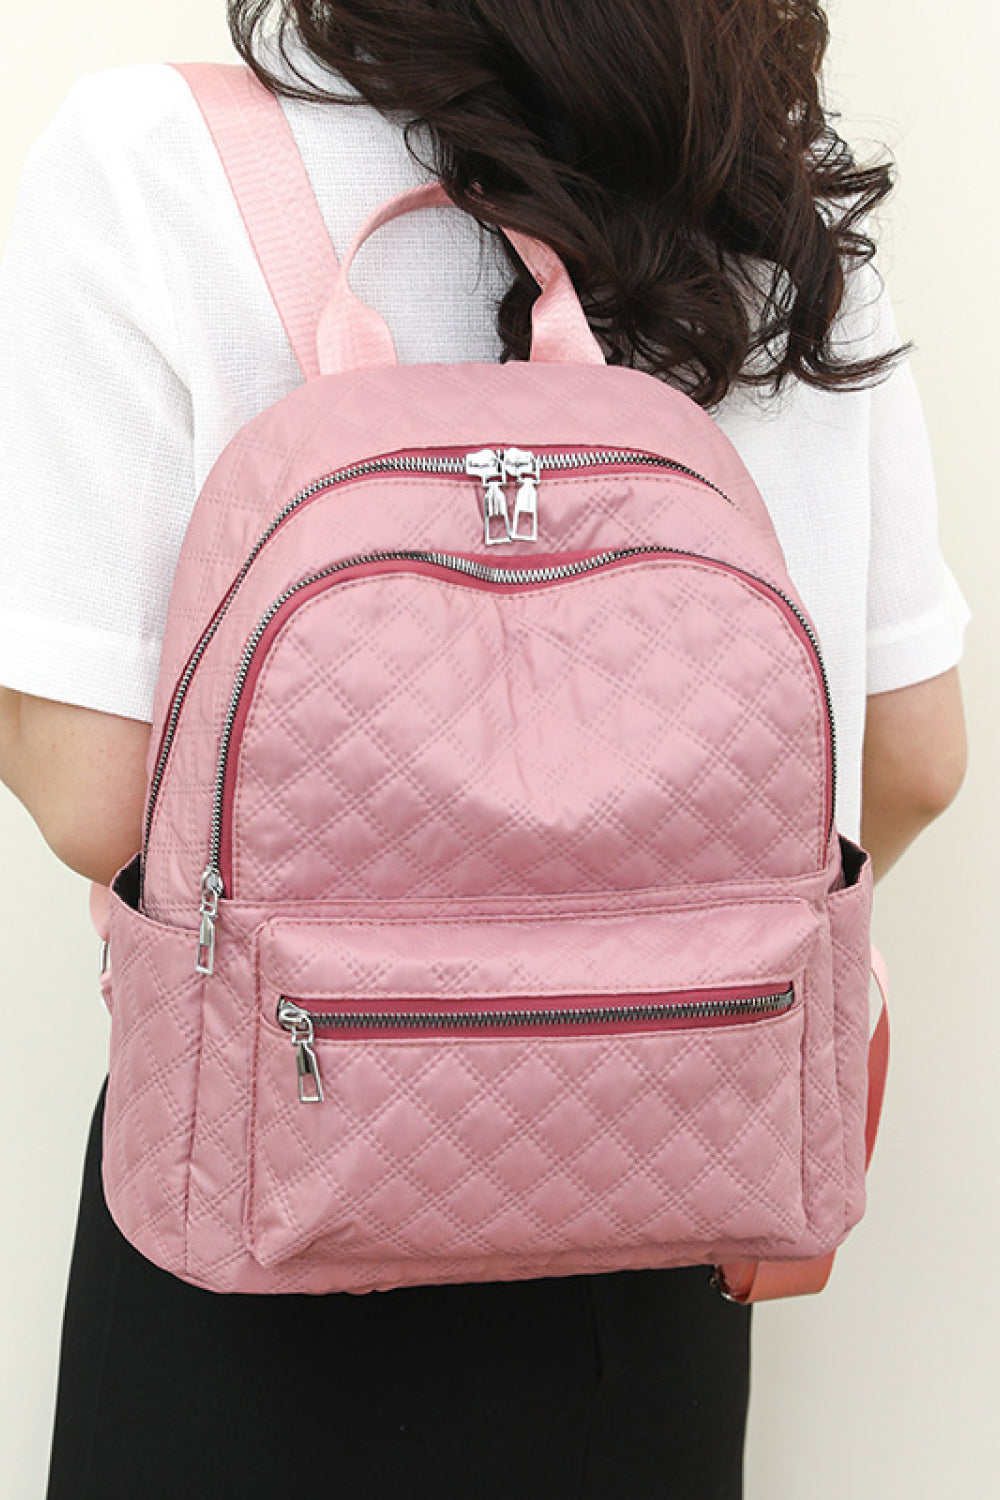 Medium Backpack available in Pink & Black, multi-pockets